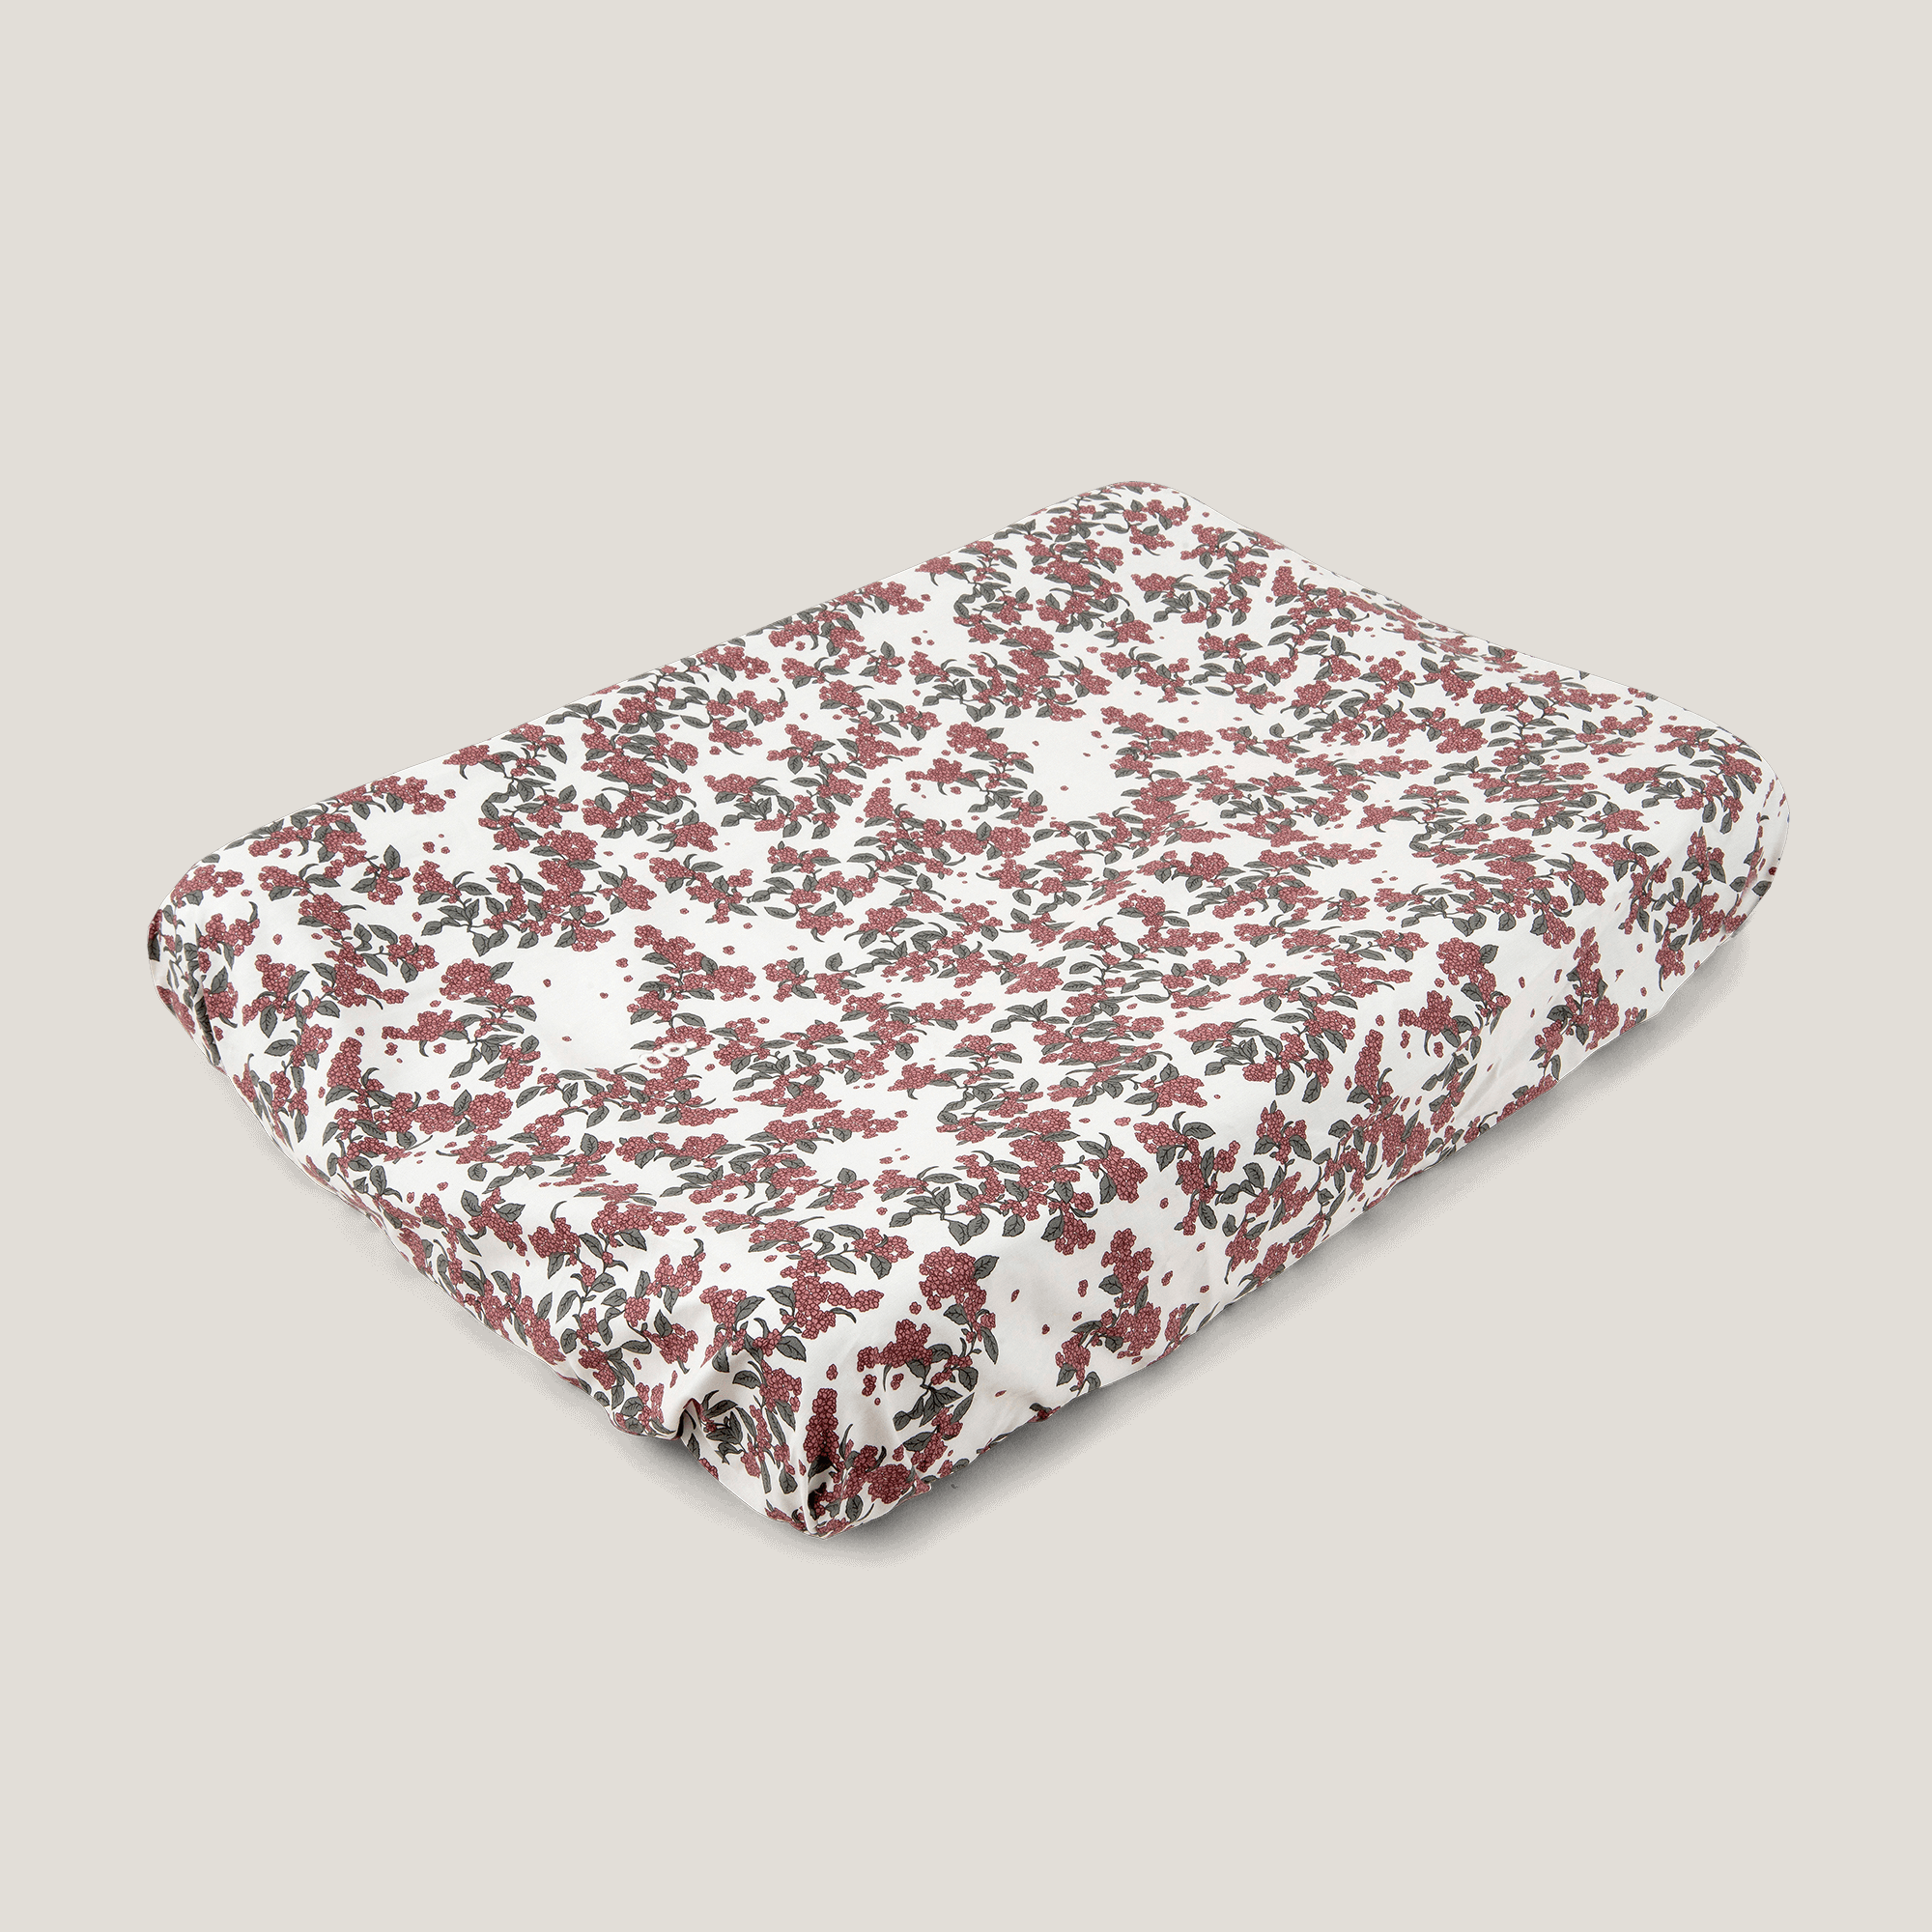 Garbo & Friends Changing mat cover - Percale Cherrie Blossom - Hola BB